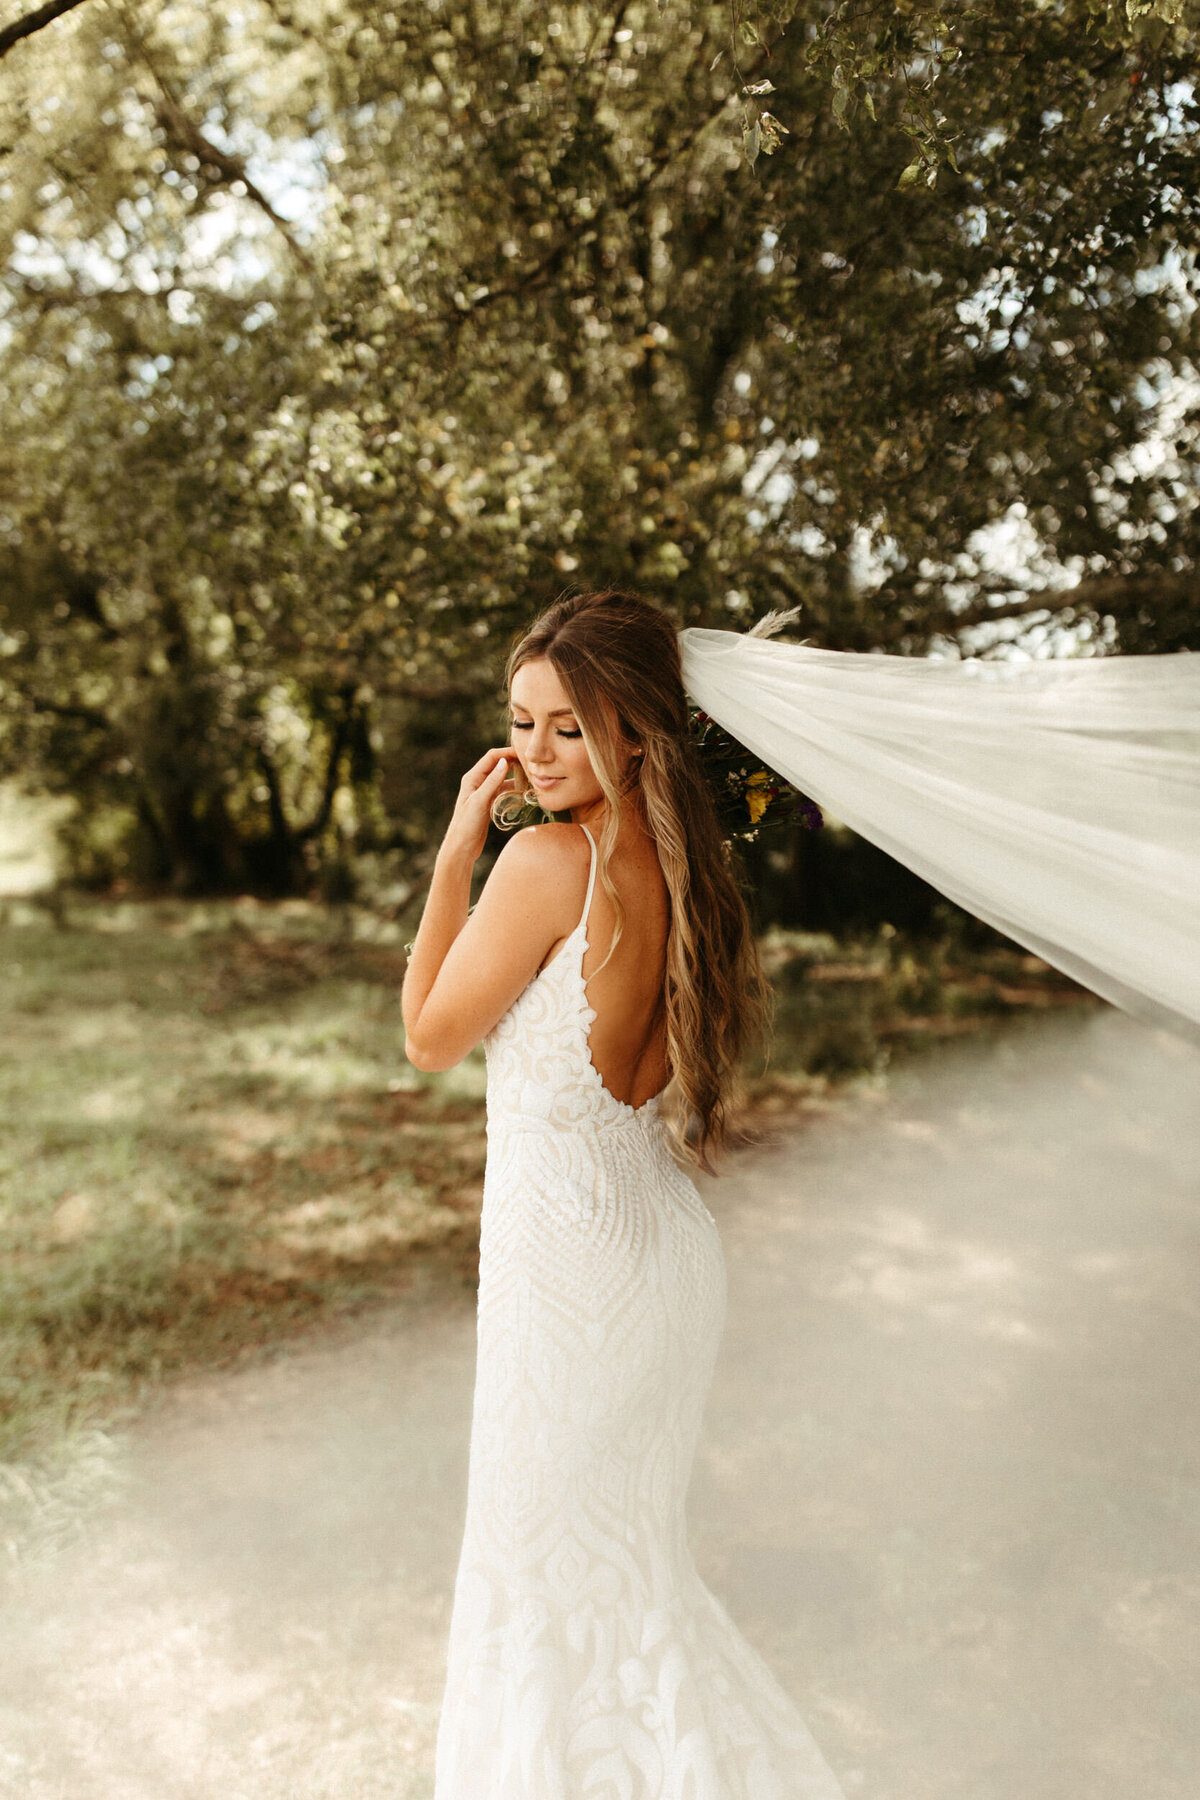 Boho bride in backless wedding dress looking back over her shoulder as the wind blows her cathedral veil